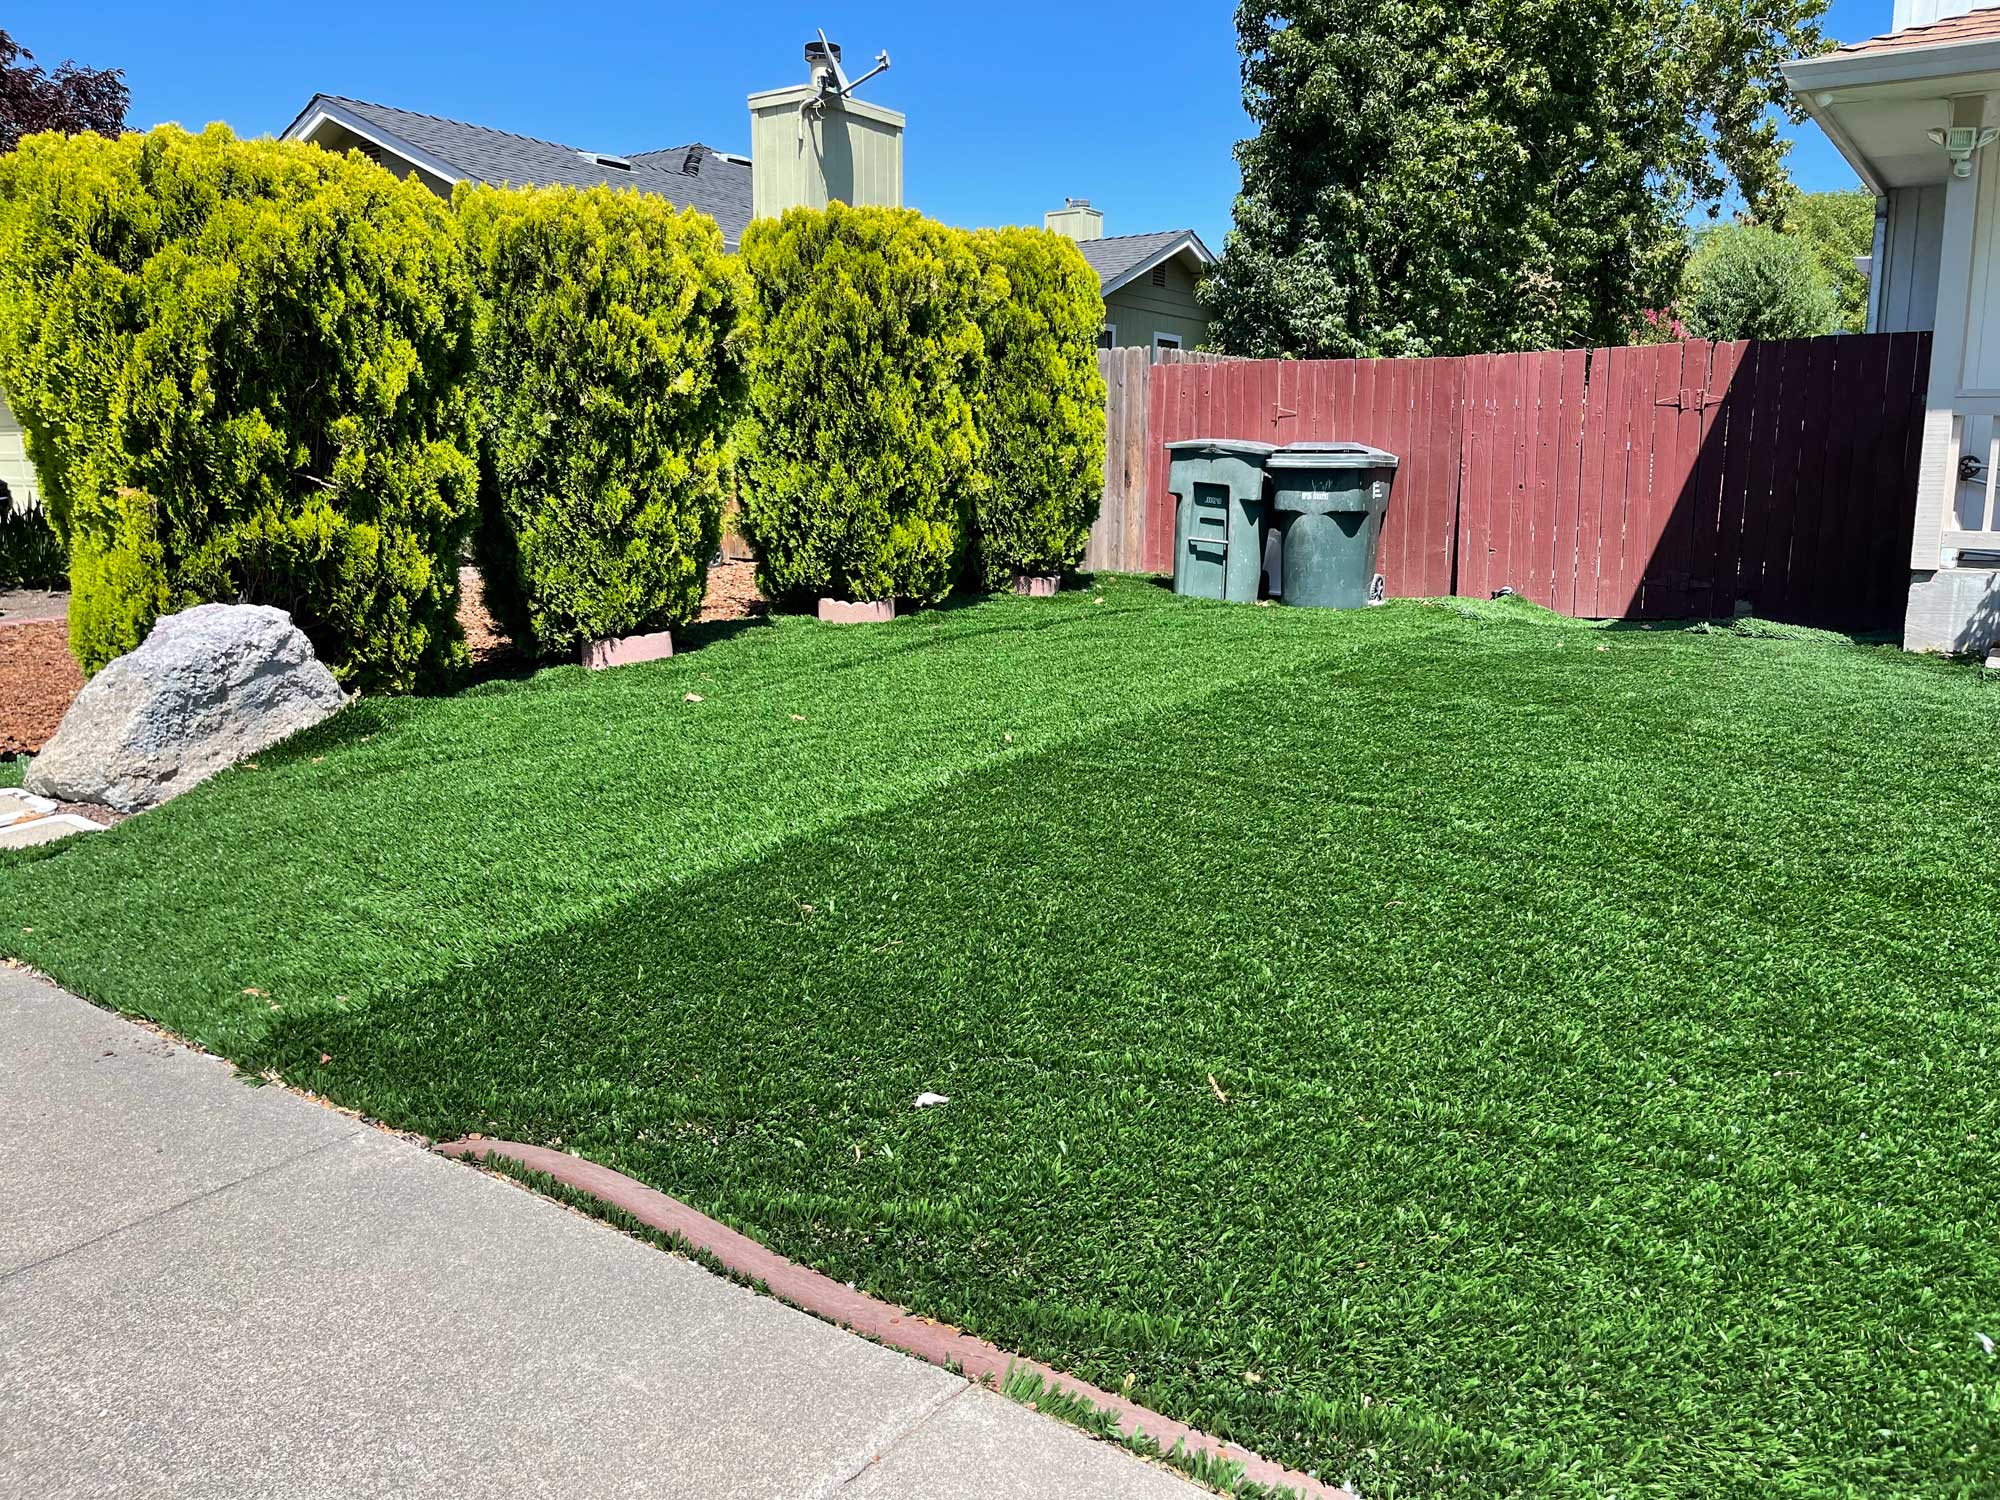 Photograph of an artificial turf lawn in a yard in Sonoma, California. The photo shows part of a yard with two sections of turf, one noticeably lighter than the other. A row of hedges borders on edge of the lawn, a fence another, and a sidewalk is in front of it.